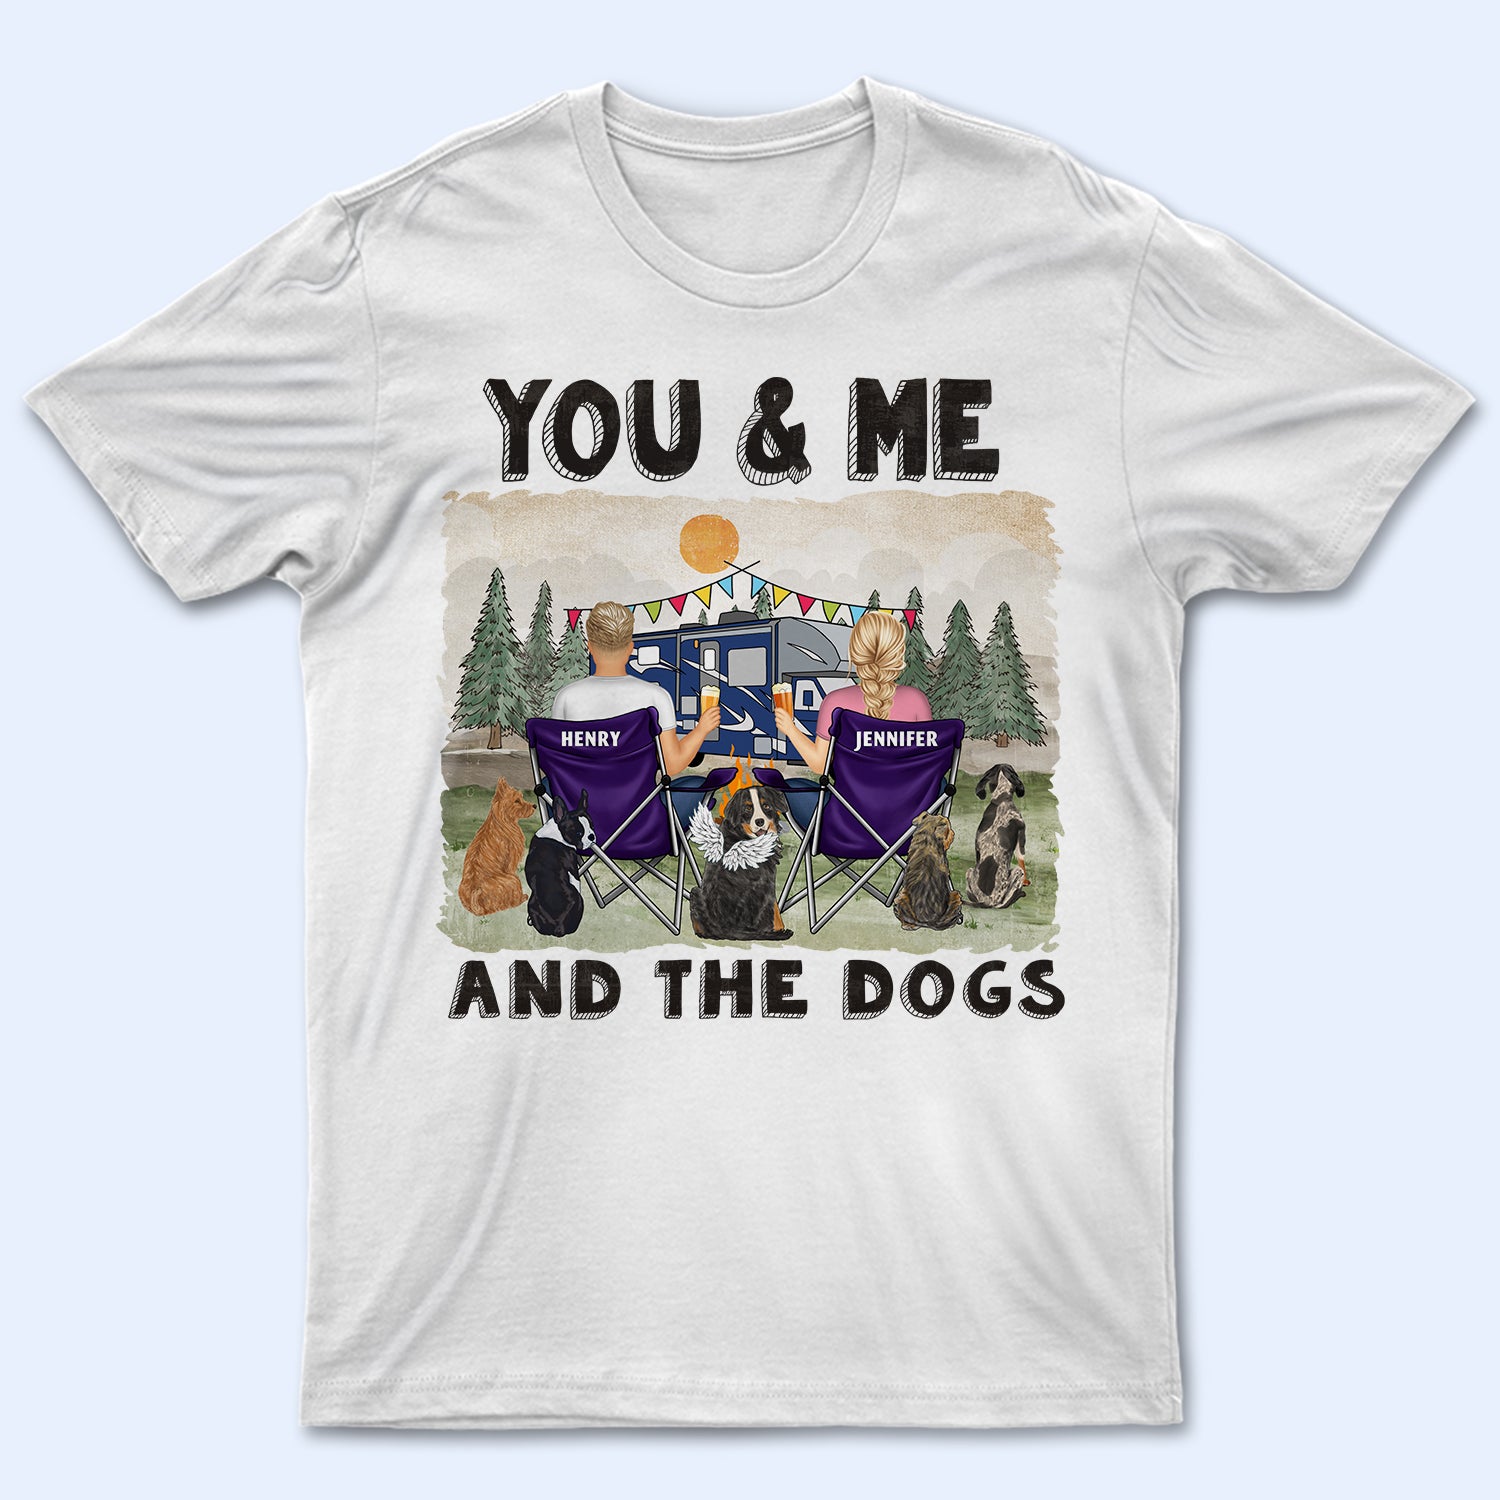 You & Me And The Dogs - Gift For Camping Couples - Personalized T Shirt